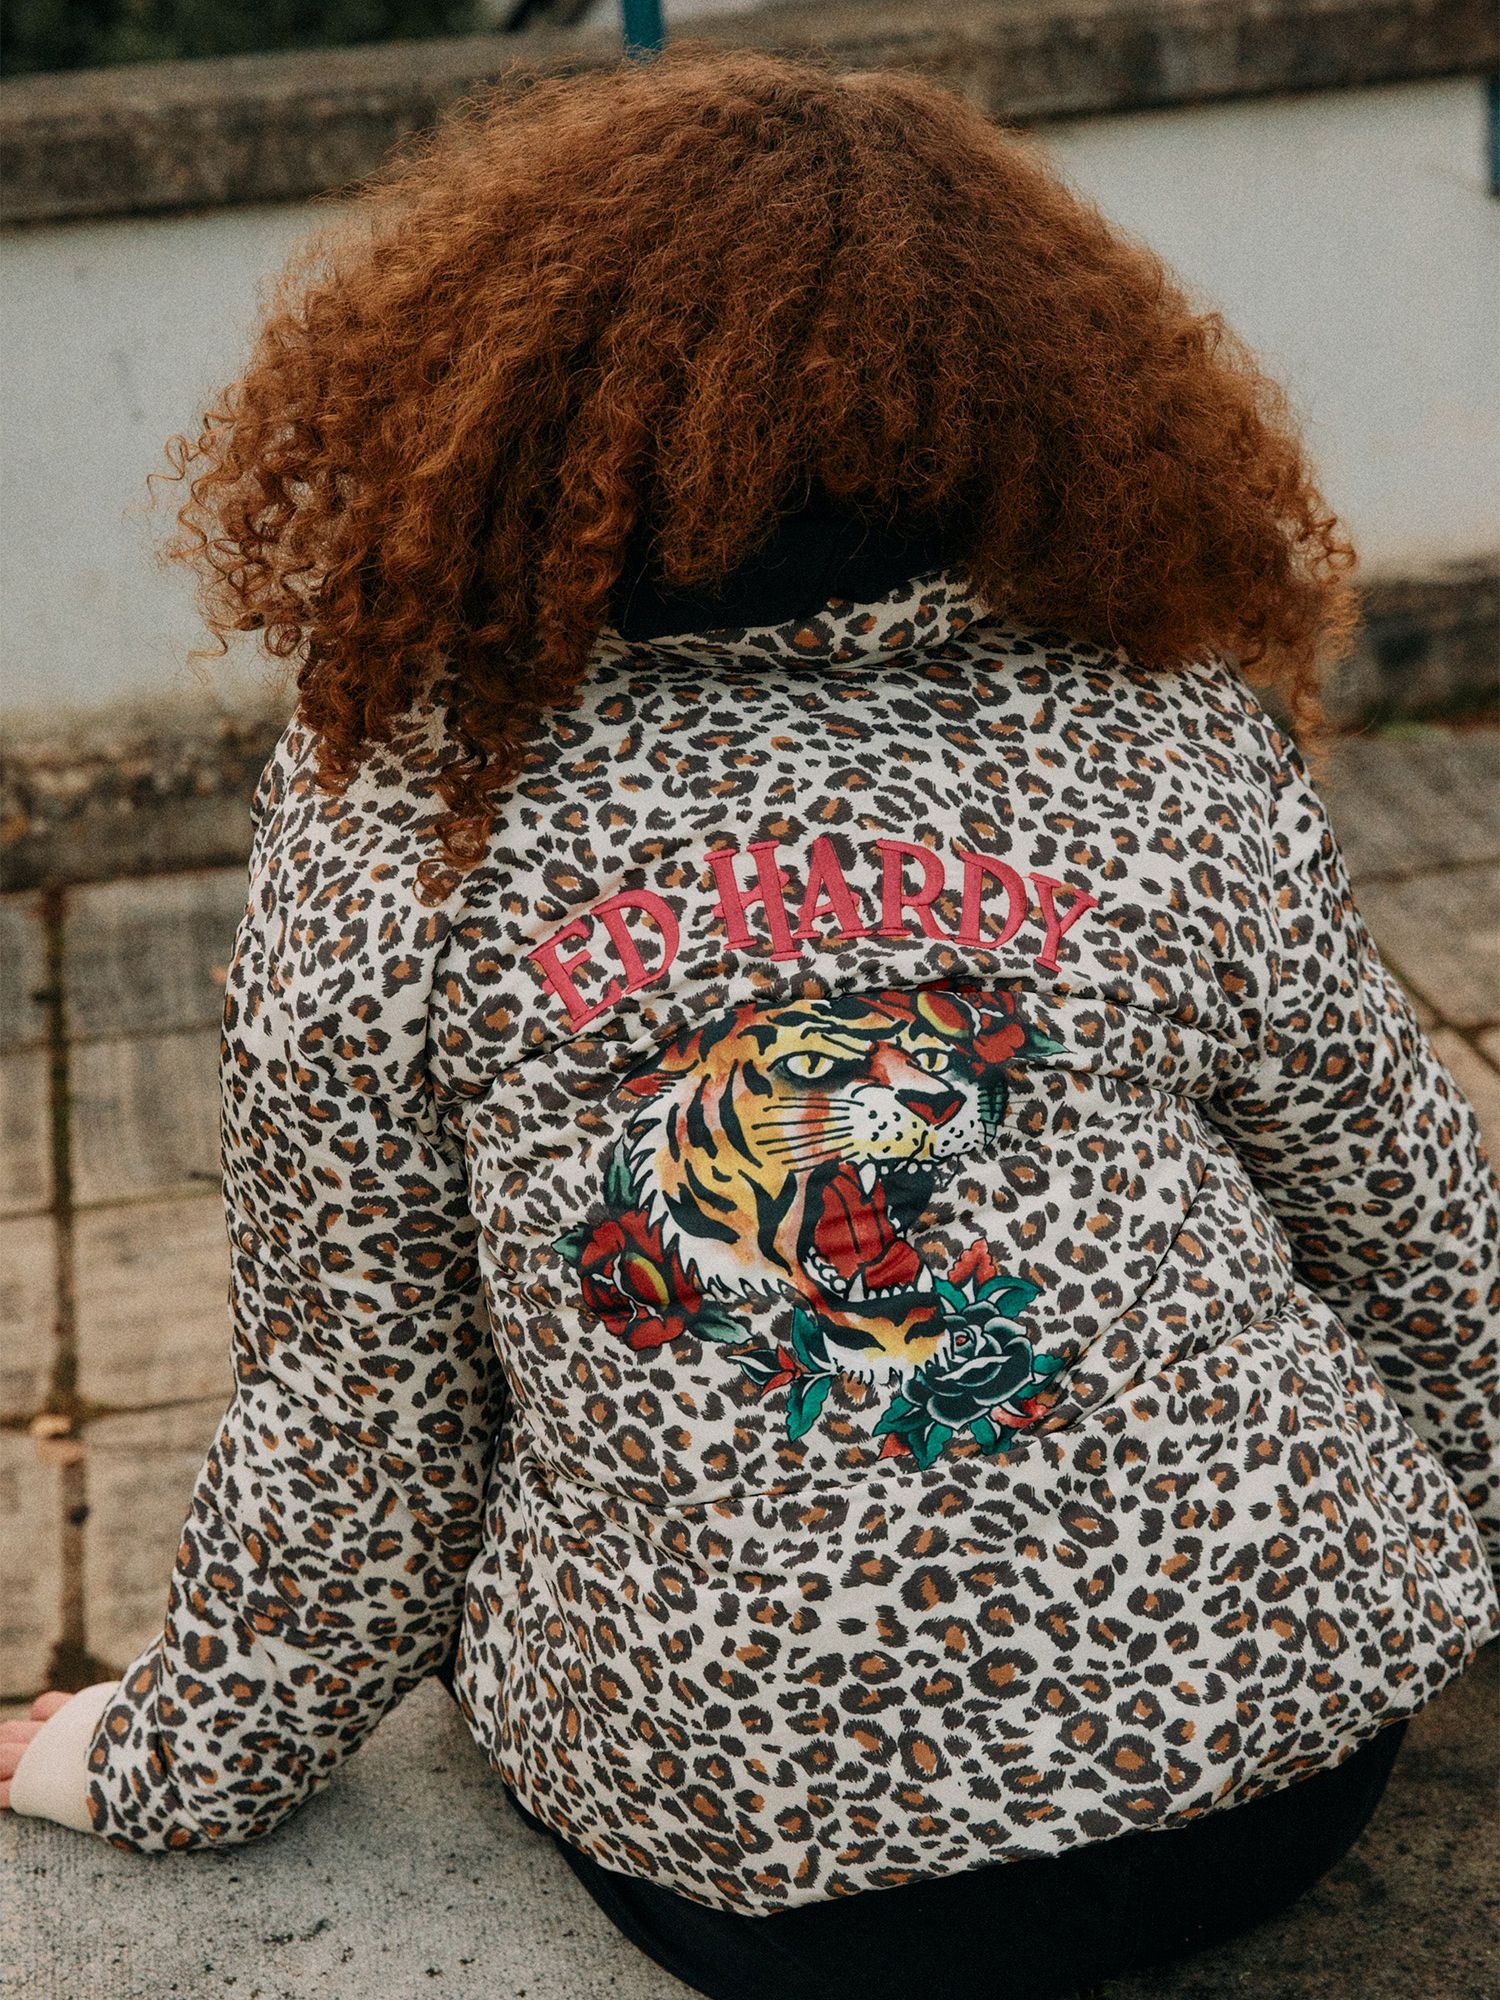 Buy Hype Kids' HYPE. x Ed Hardy Cropped Leopard Print Jacket, Multi Online at johnlewis.com